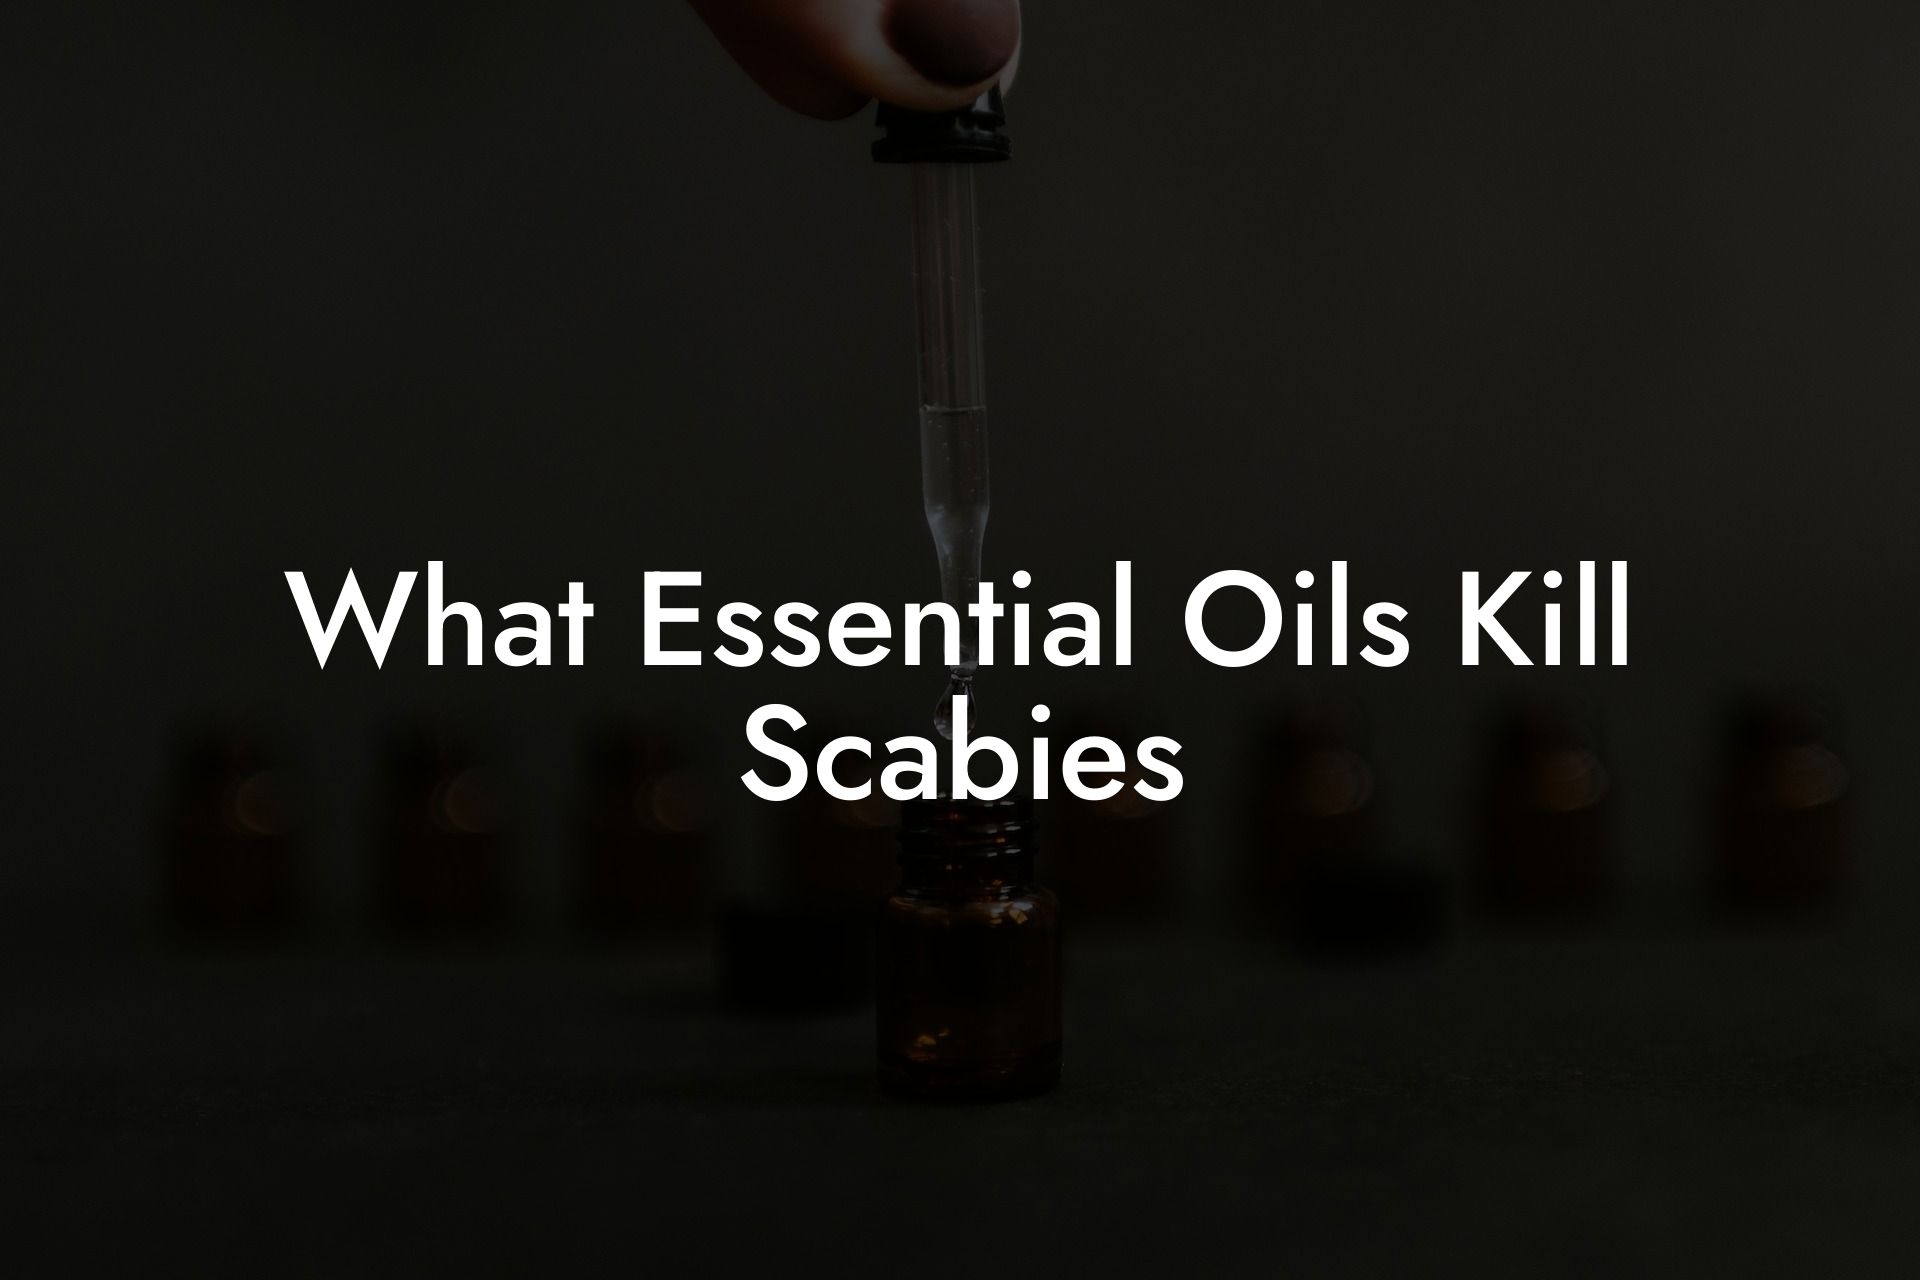 What Essential Oils Kill Scabies